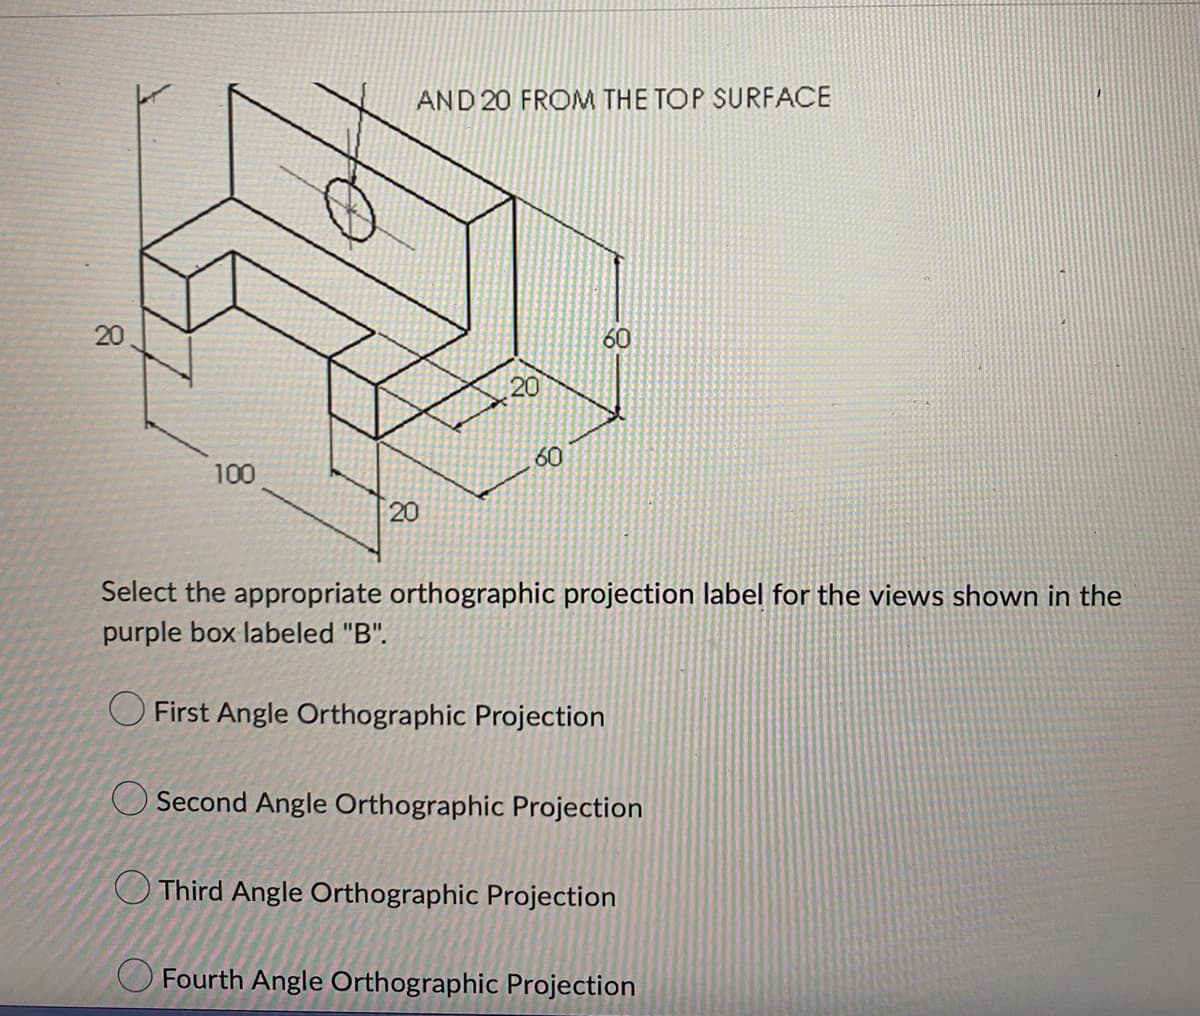 20
20
AND 20 FROM THE TOP SURFACE
60
20
100
60
20
Select the appropriate orthographic projection label for the views shown in the
purple box labeled "B".
First Angle Orthographic Projection
Second Angle Orthographic Projection
Third Angle Orthographic Projection
Fourth Angle Orthographic Projection